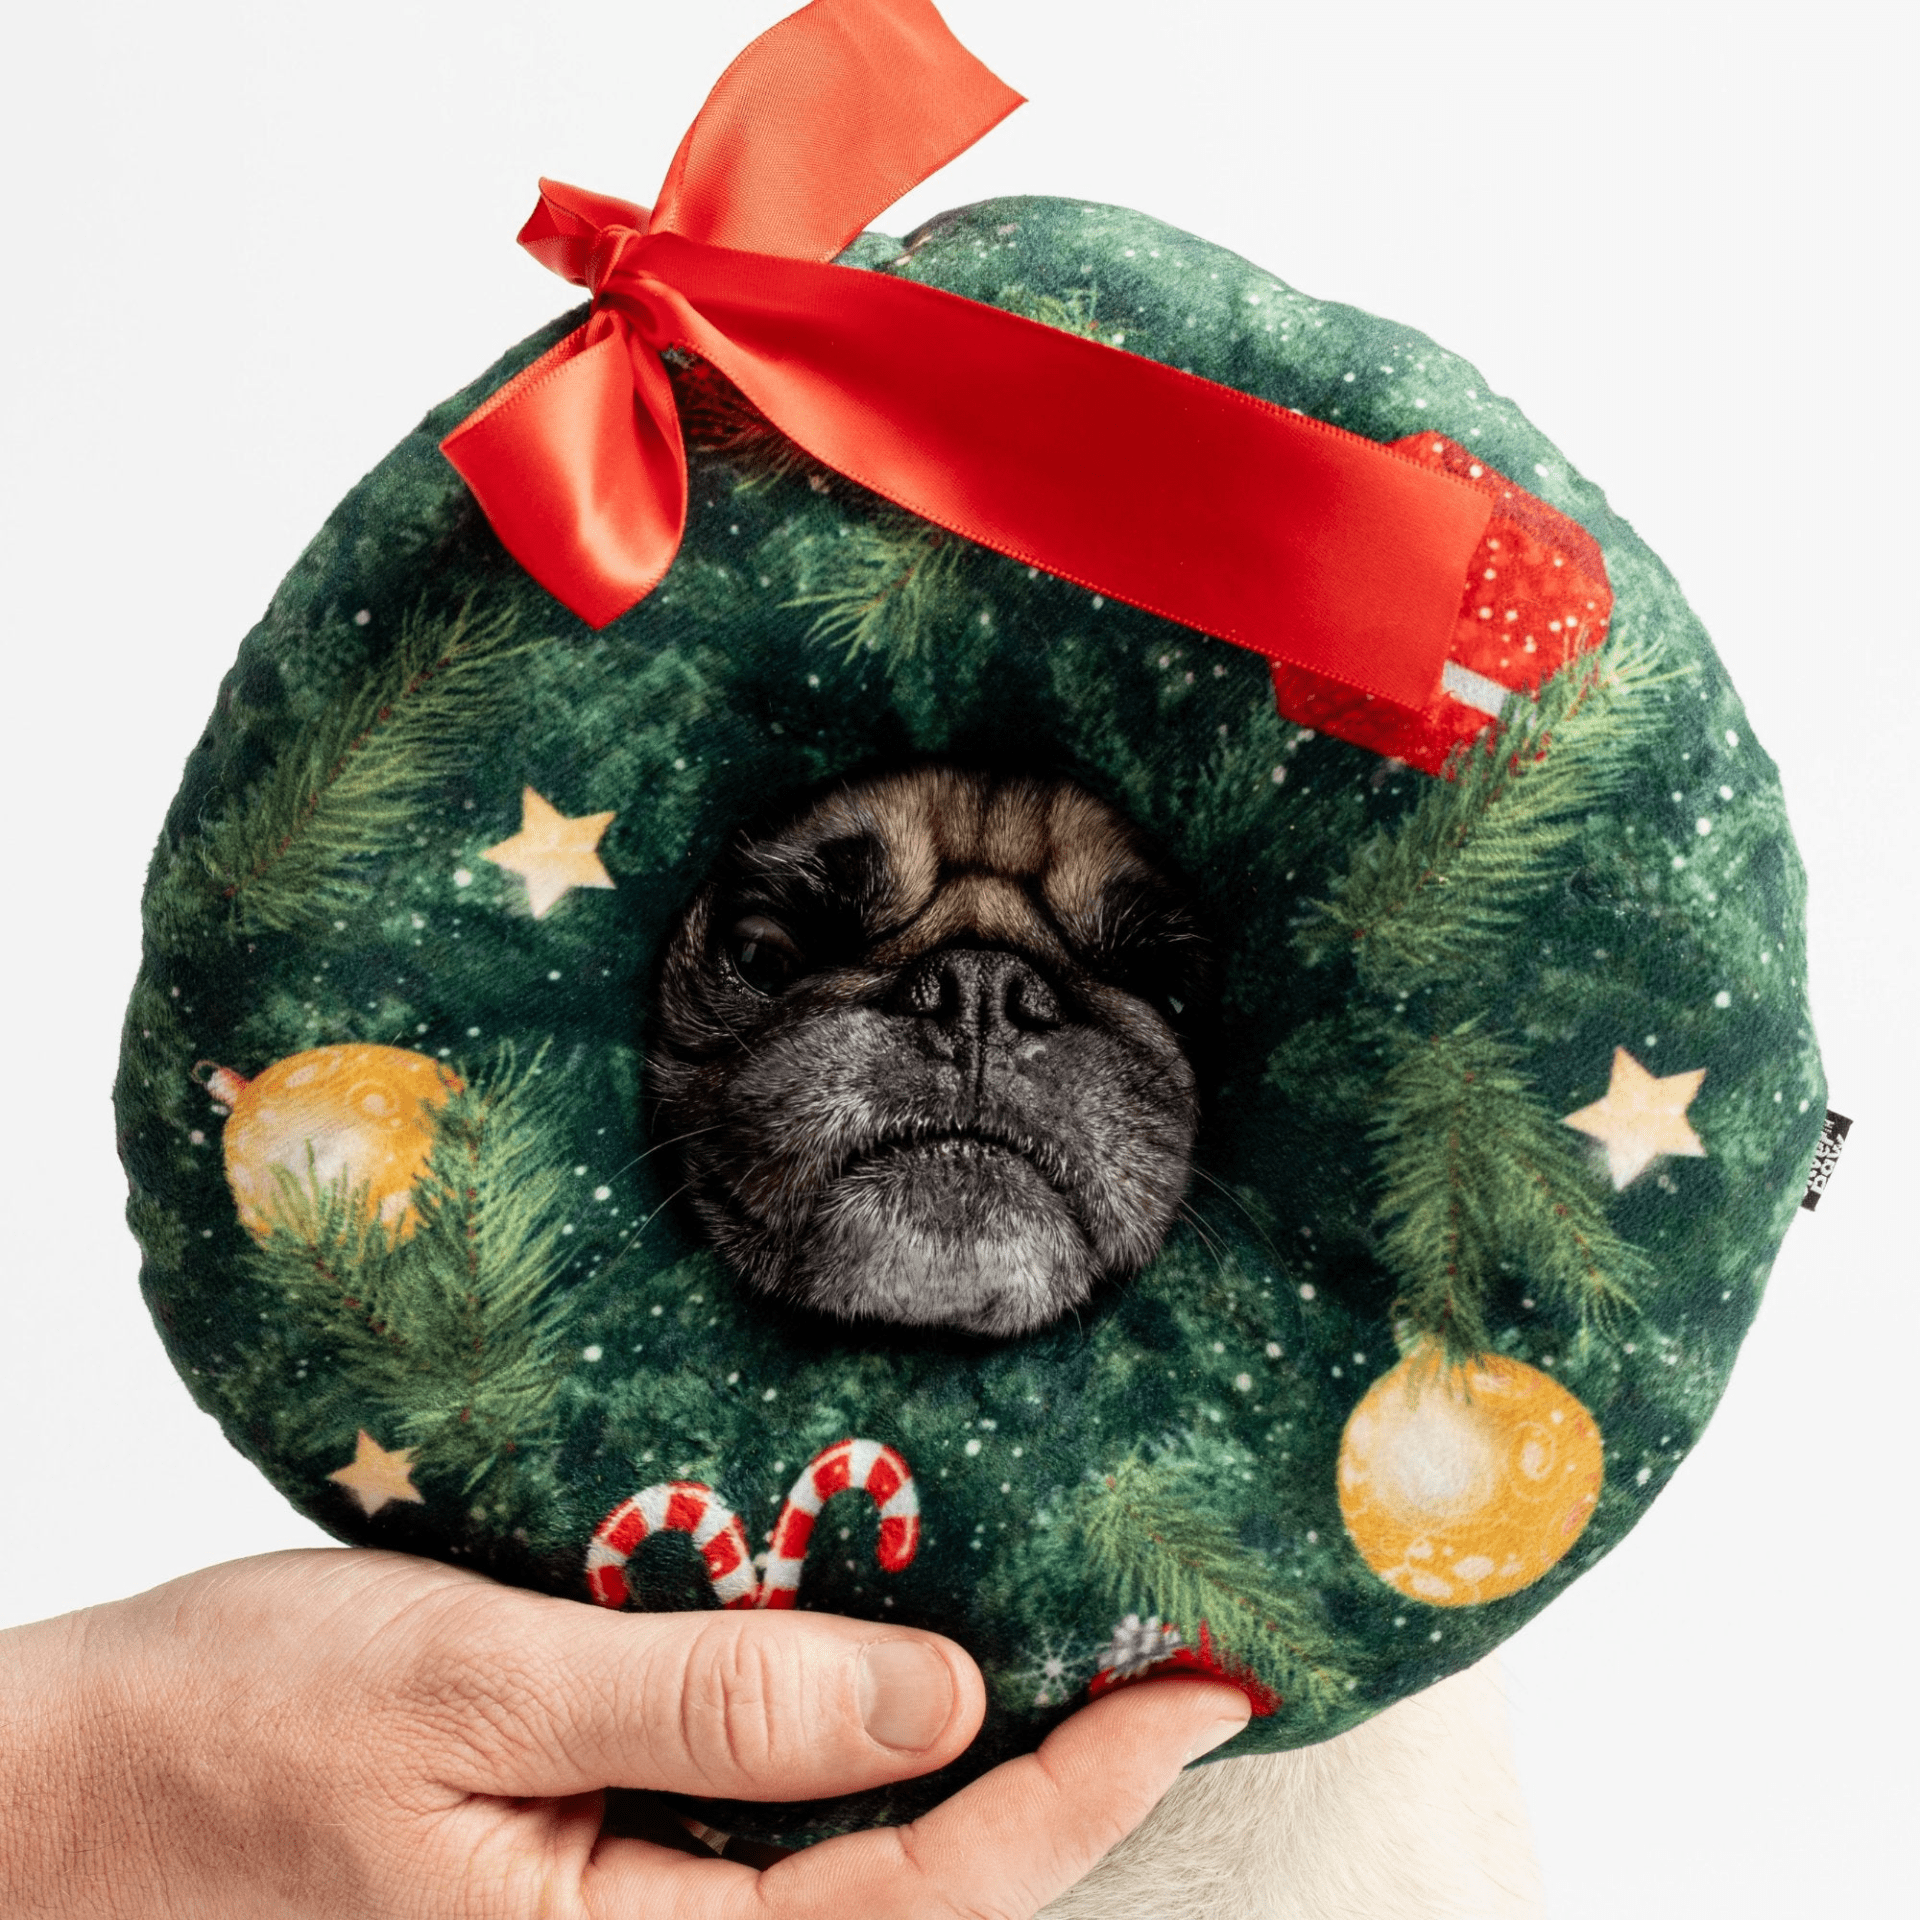 Dog and Pet Stuff Christmas Wreath Toy